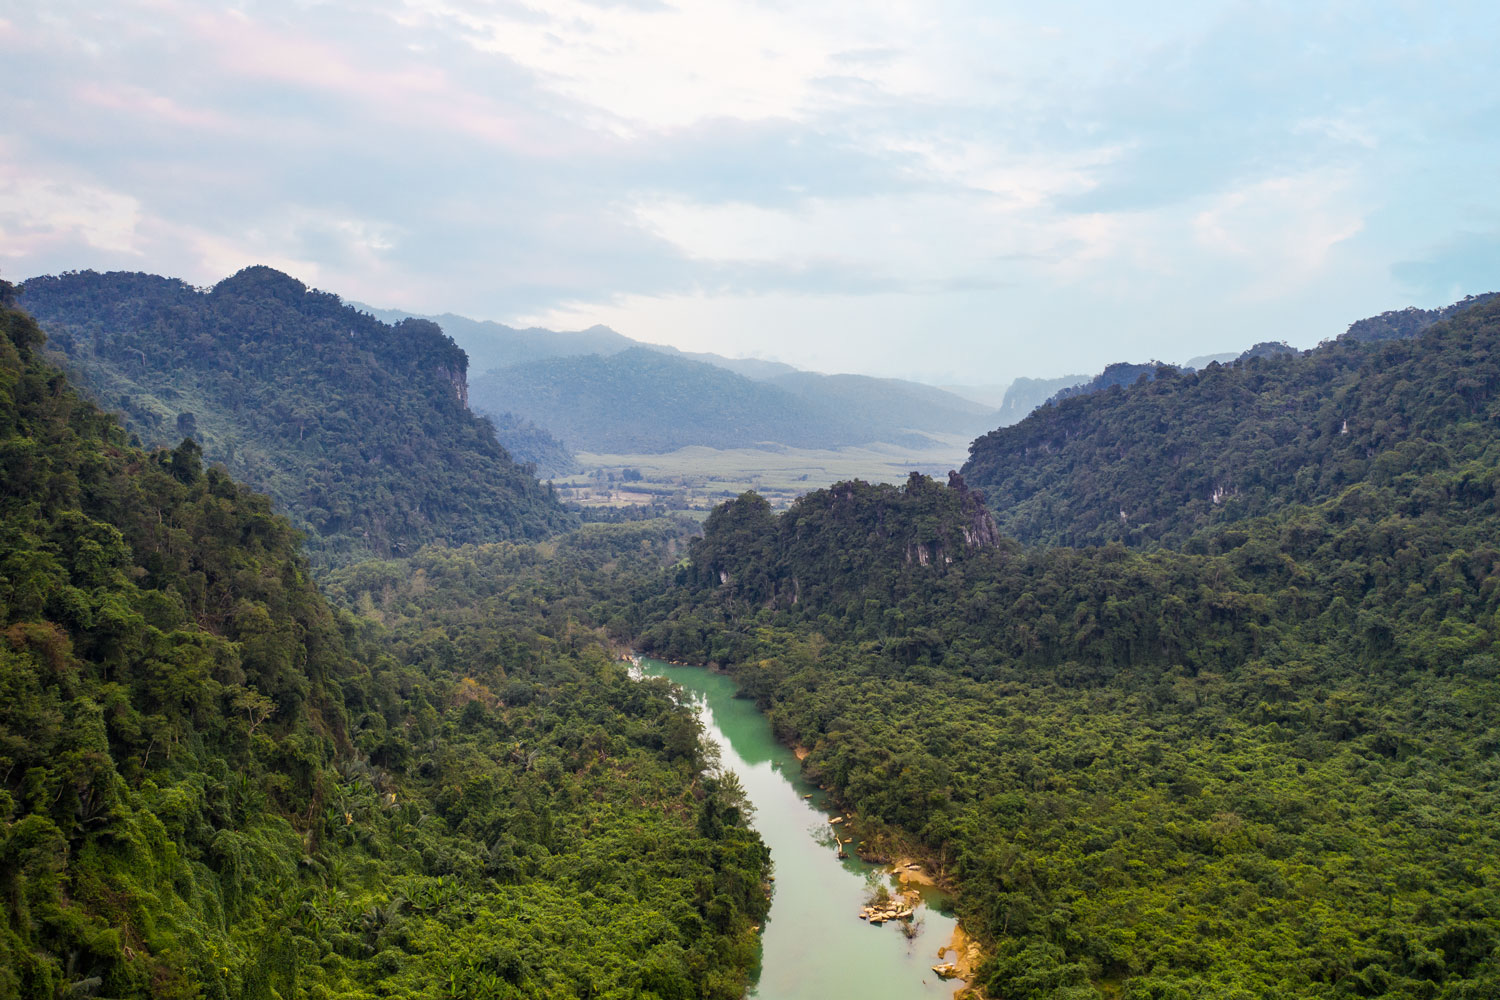 The Rao Nan River is commonly known as a tributary of Gianh river, the final section flowing through Cao Quang commune.